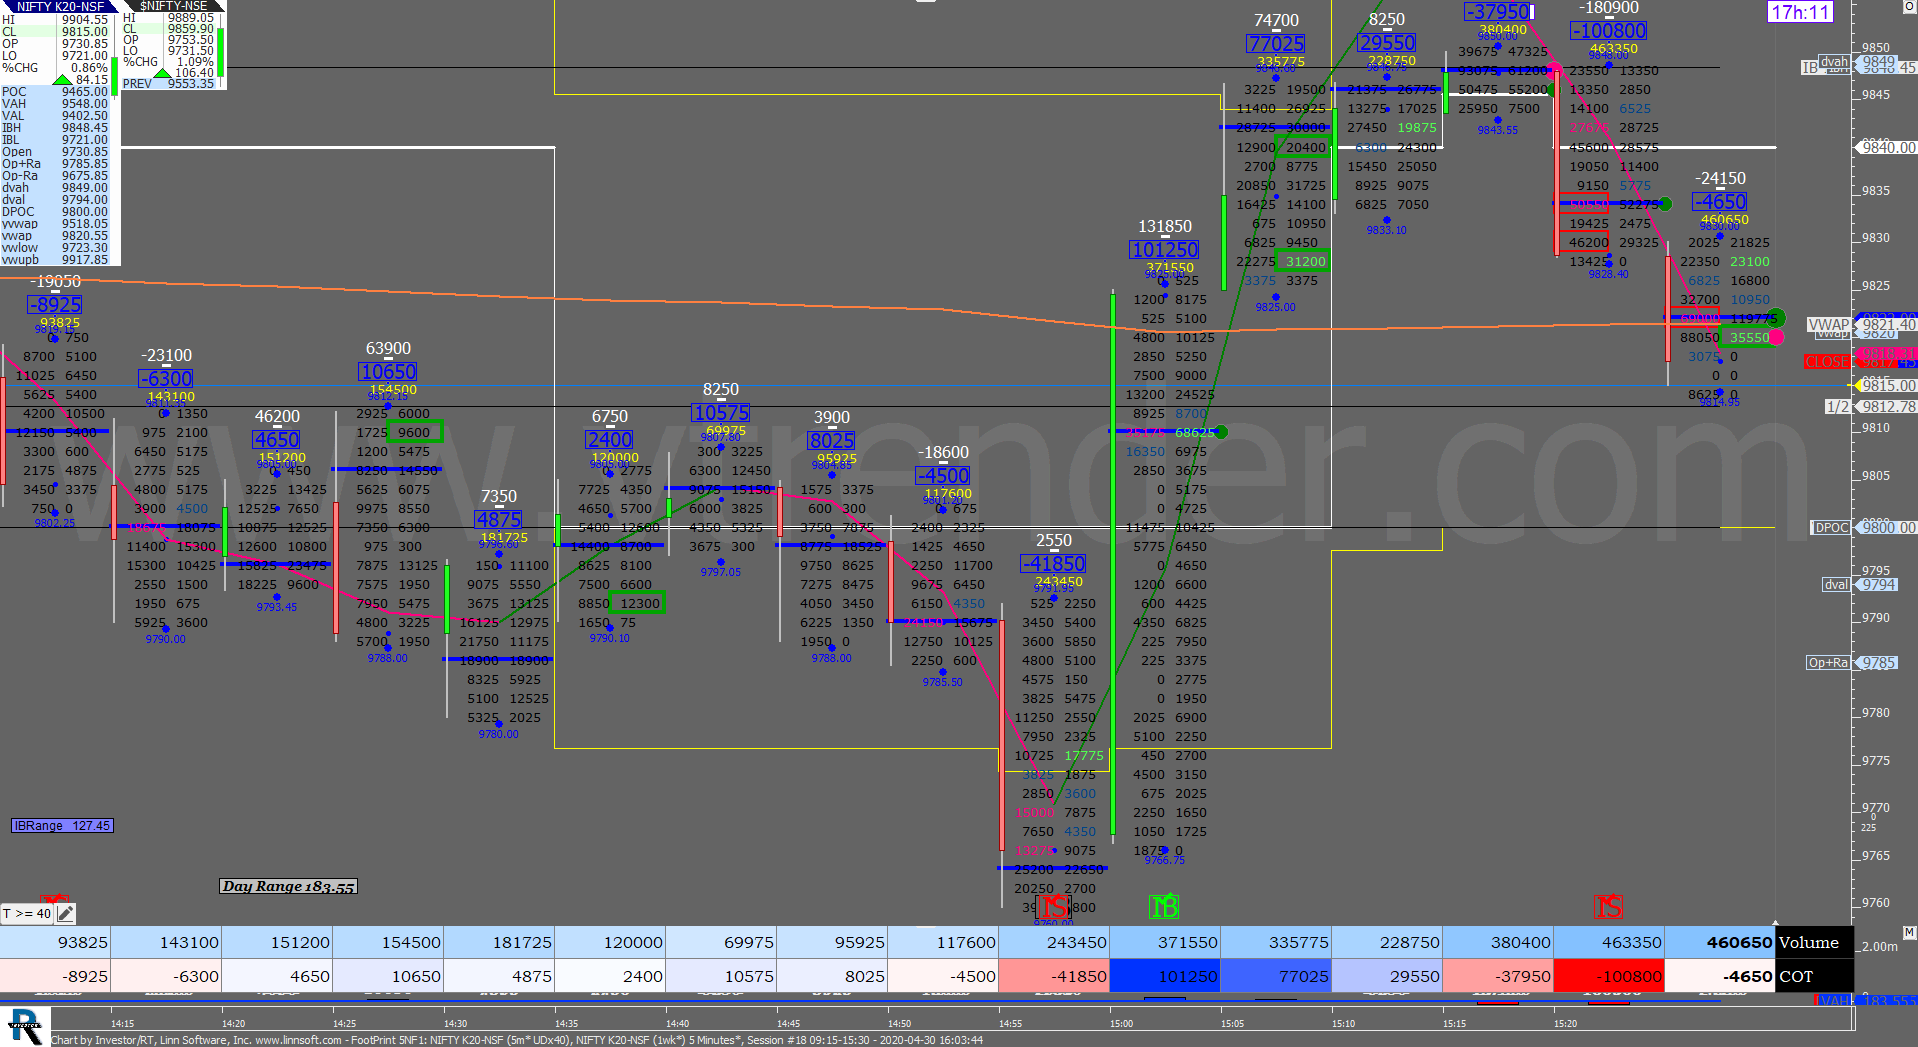 5 34 Order Flow Charts Dated 30Th Apr 2020 (5 Mins) Banknifty Futures, Day Trading, Intraday Trading, Intraday Trading Strategies, Nifty Futures, Order Flow Analysis, Support And Resistance, Trading Strategies, Volume Profile Trading